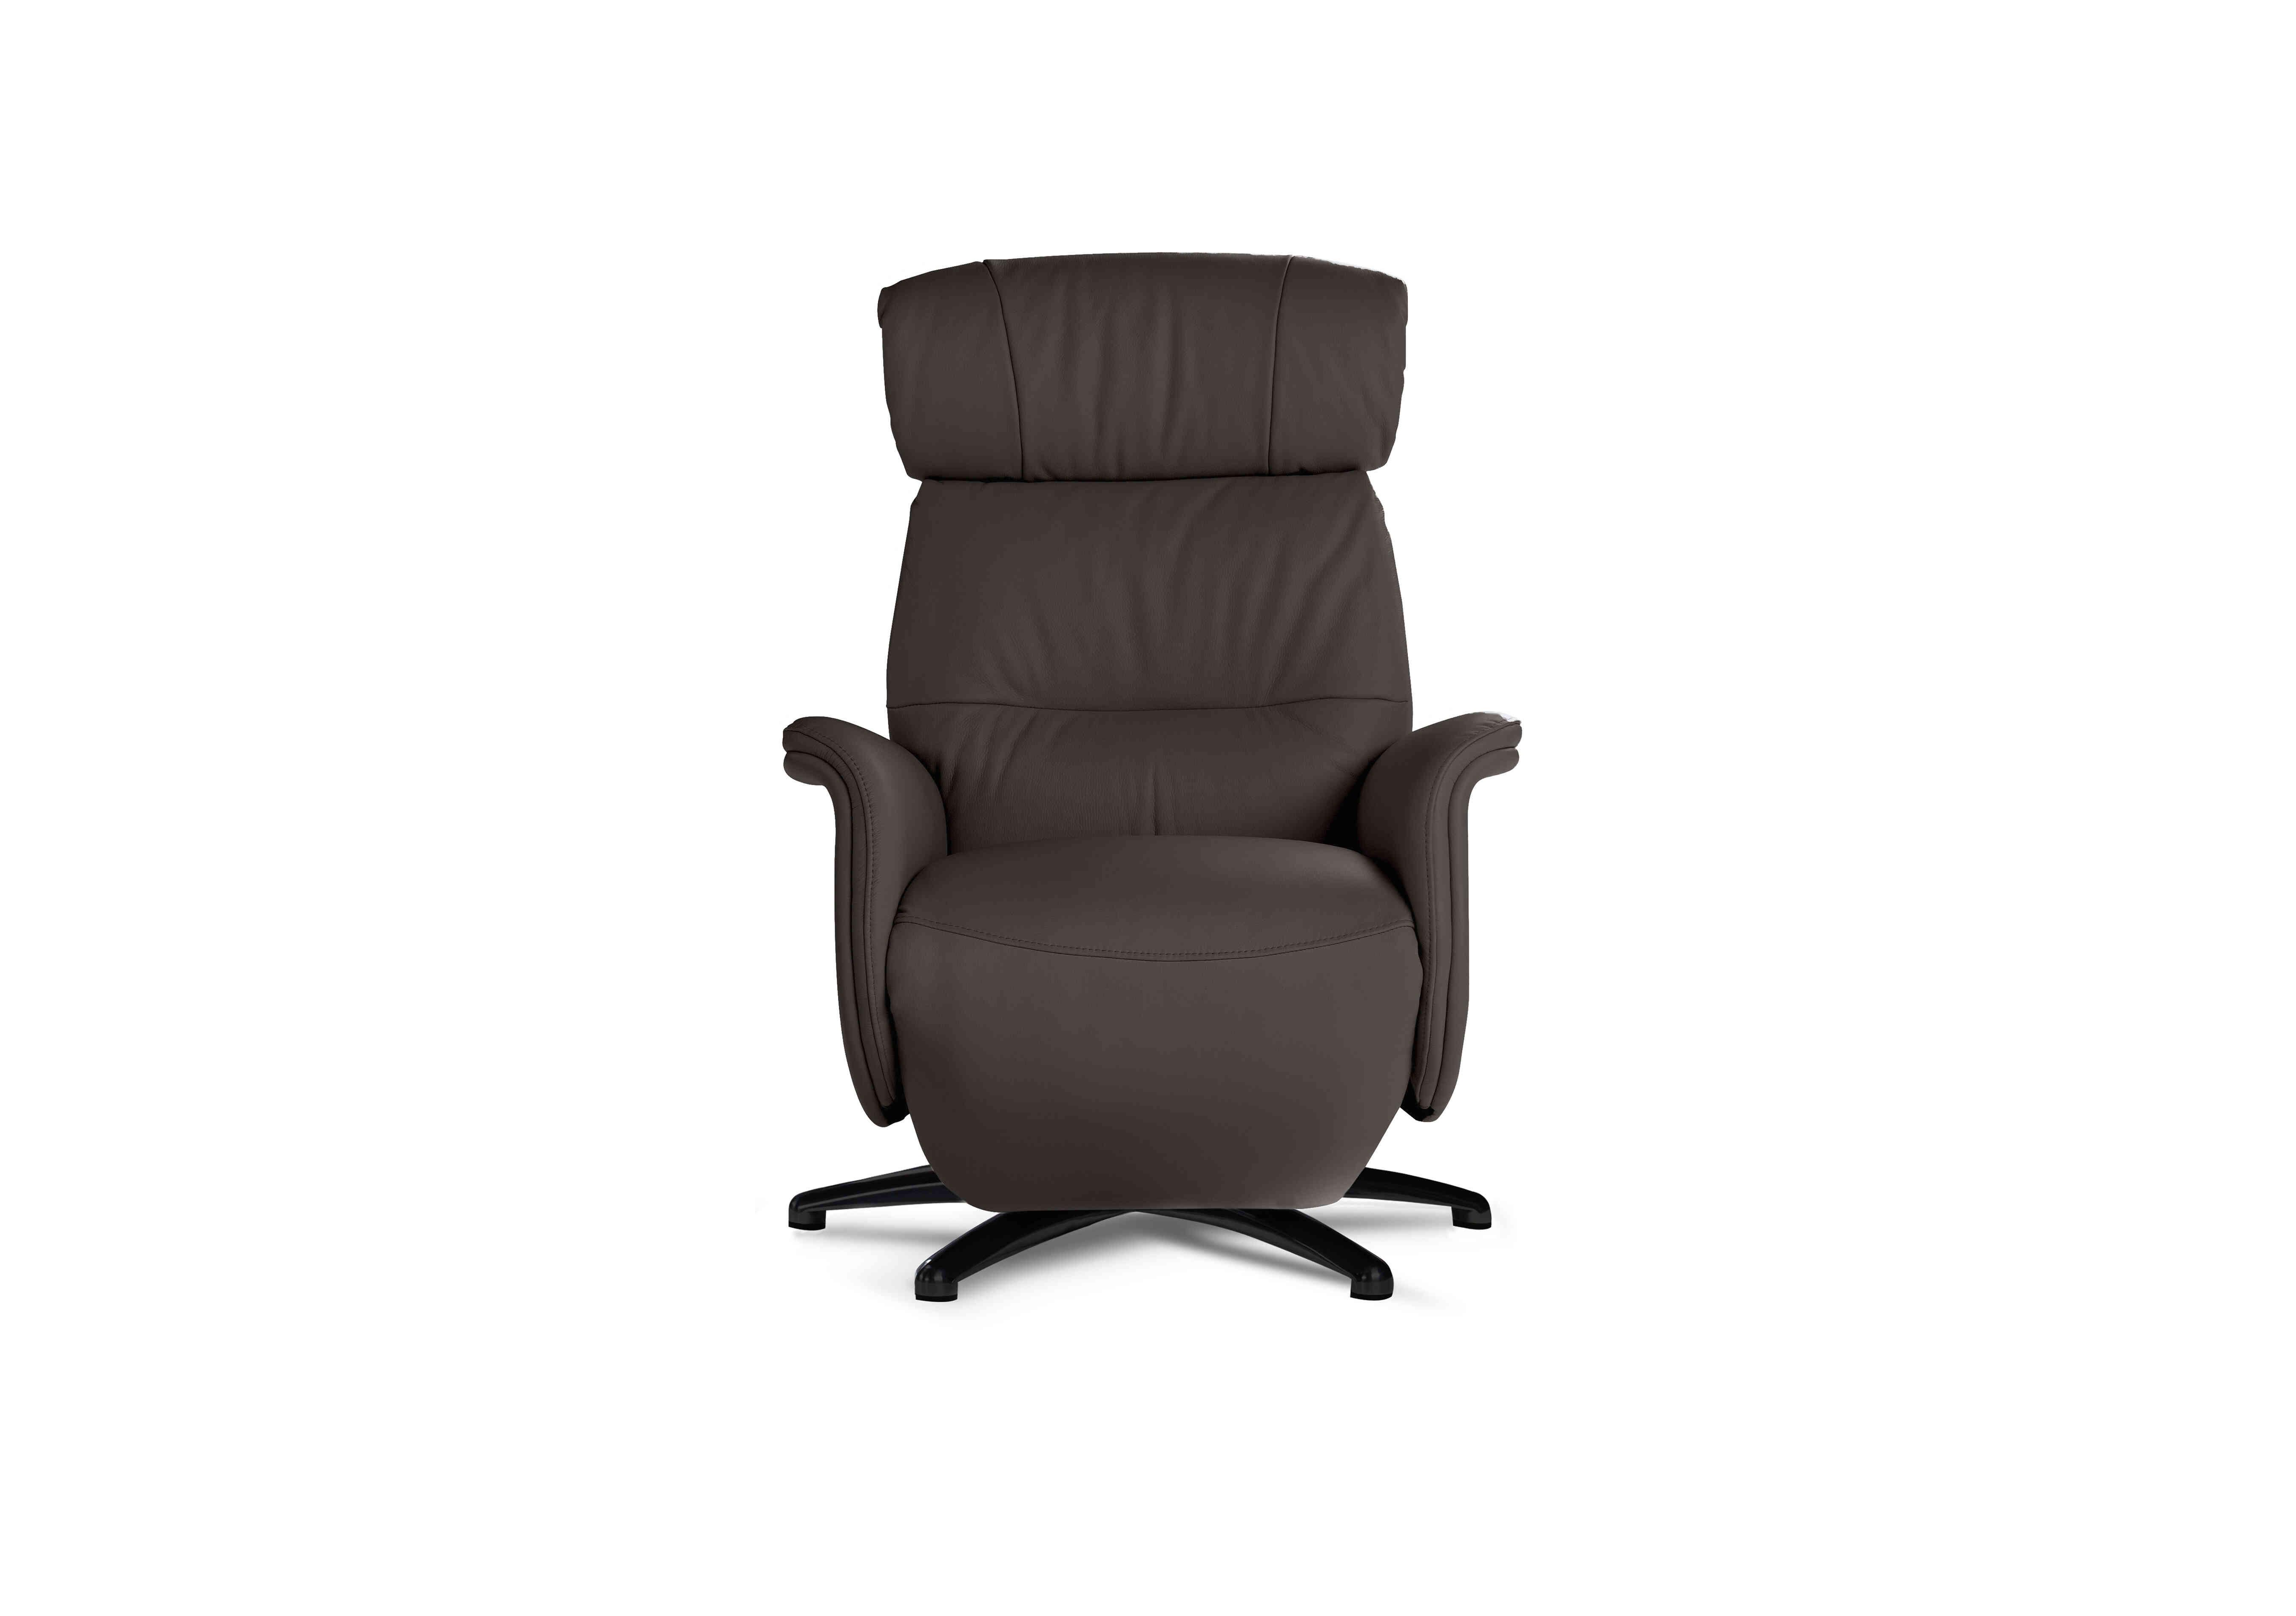 Tricolour Vincenzo Leather Swivel Power Recliner Chair in Torello 327 Grigio Scuro An Ft on Furniture Village